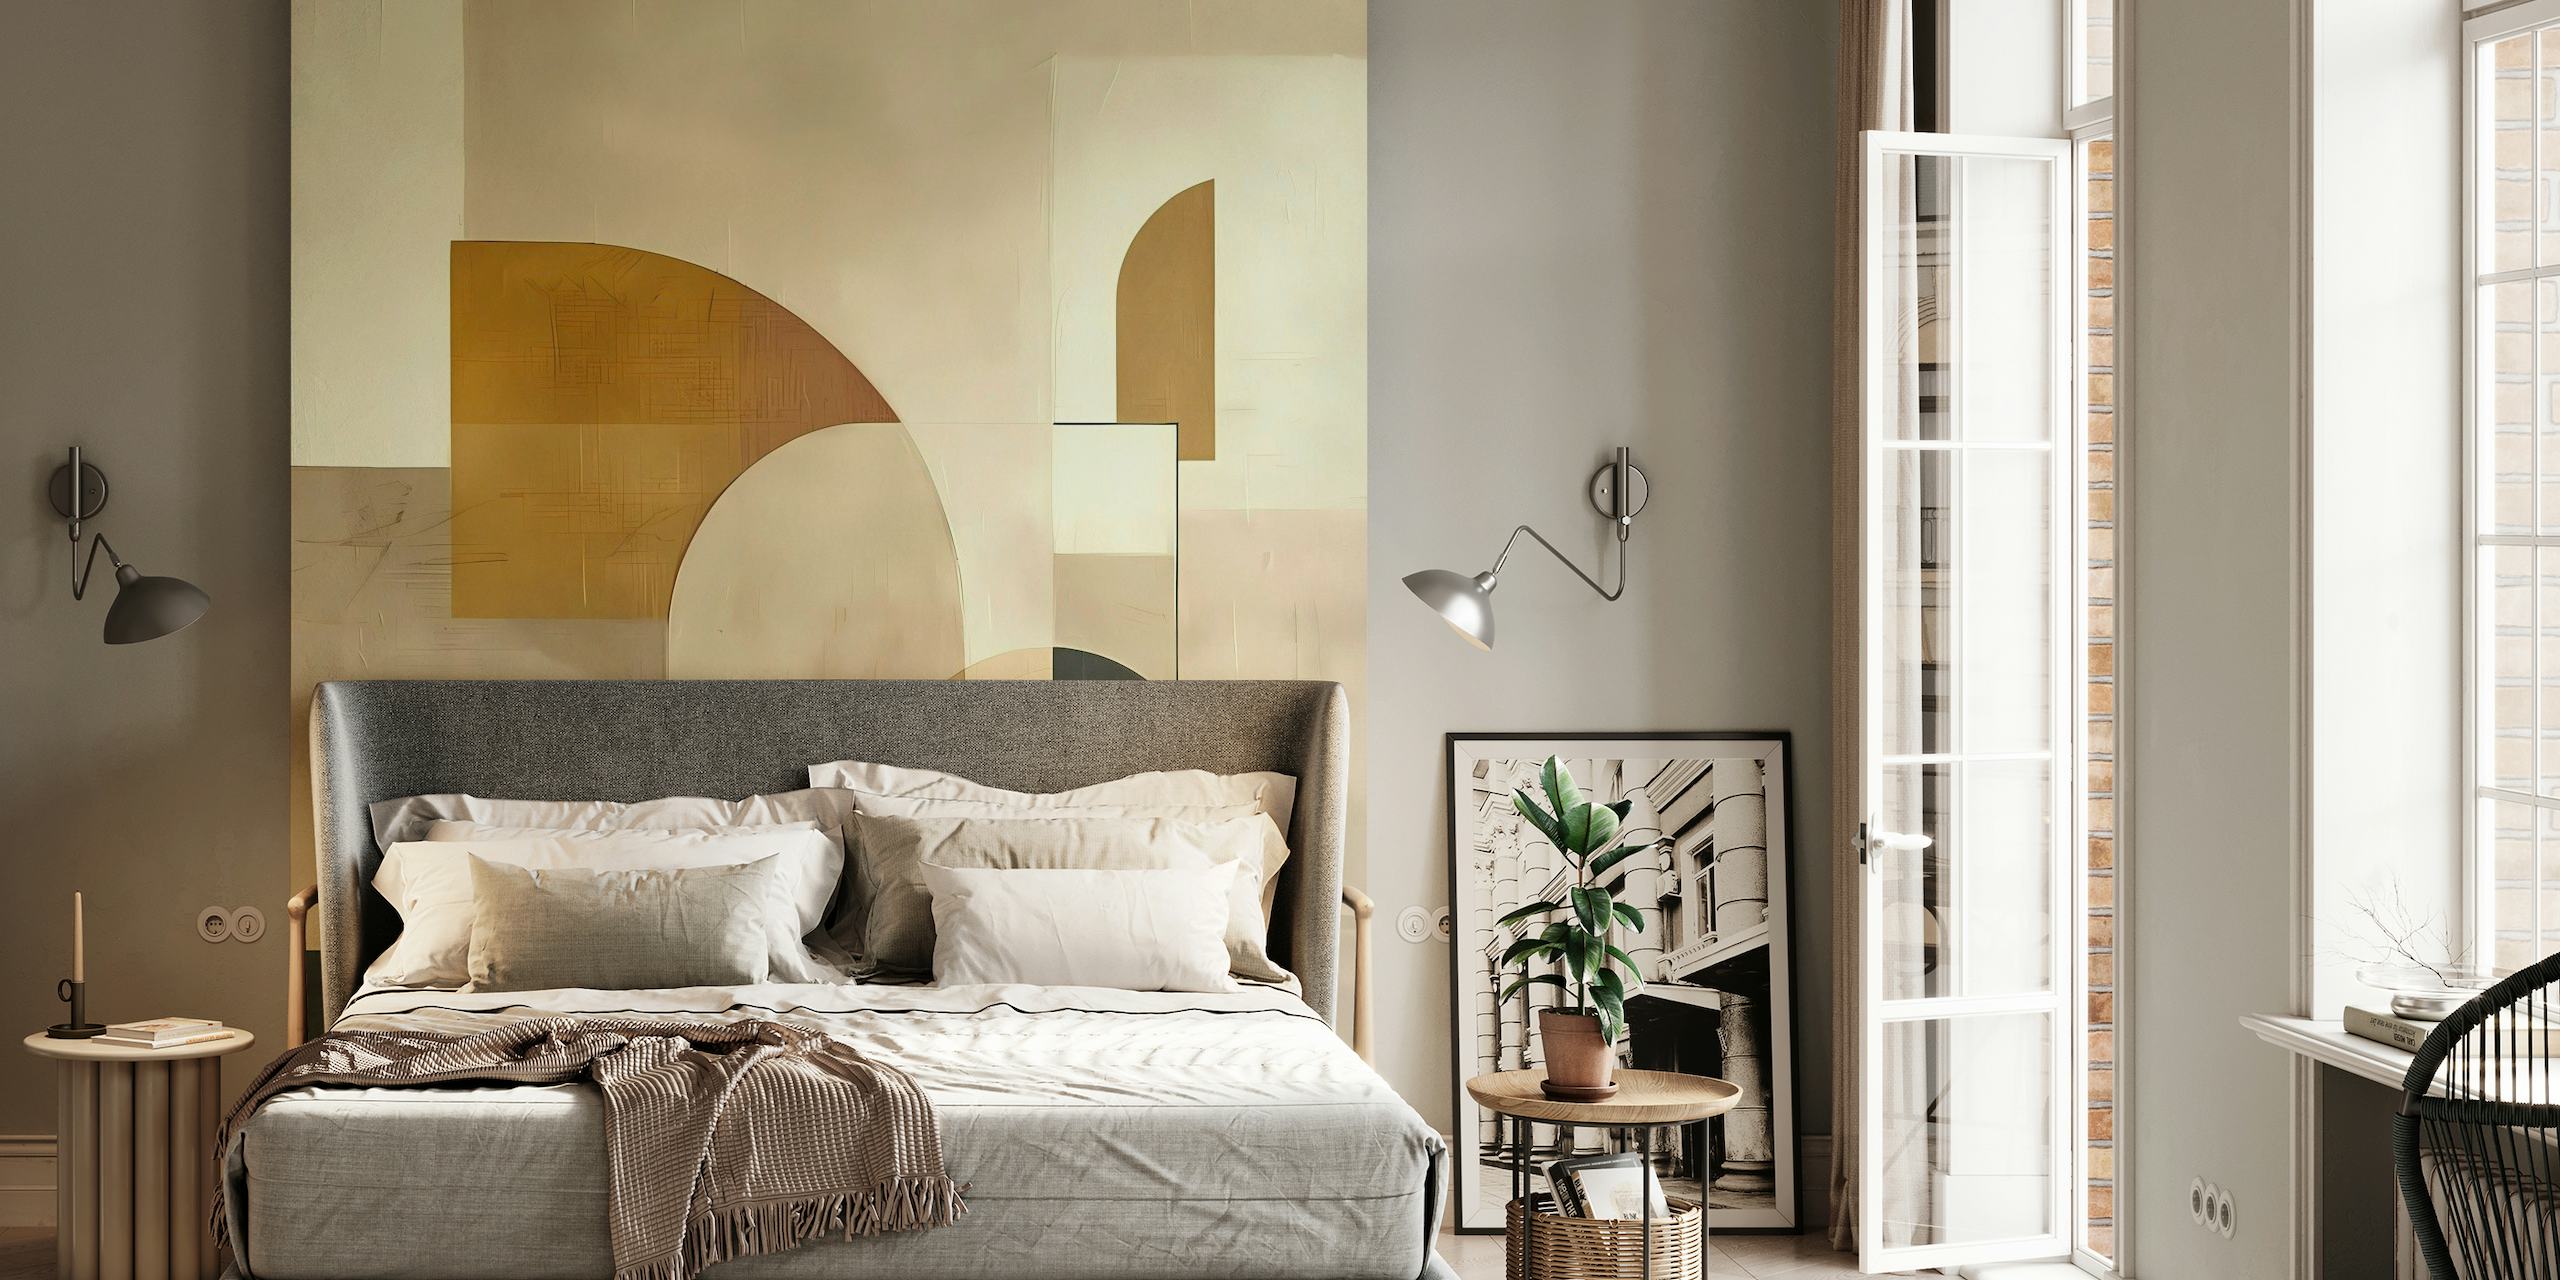 Boho Geometric abstract wall mural with earth tones and soft shapes